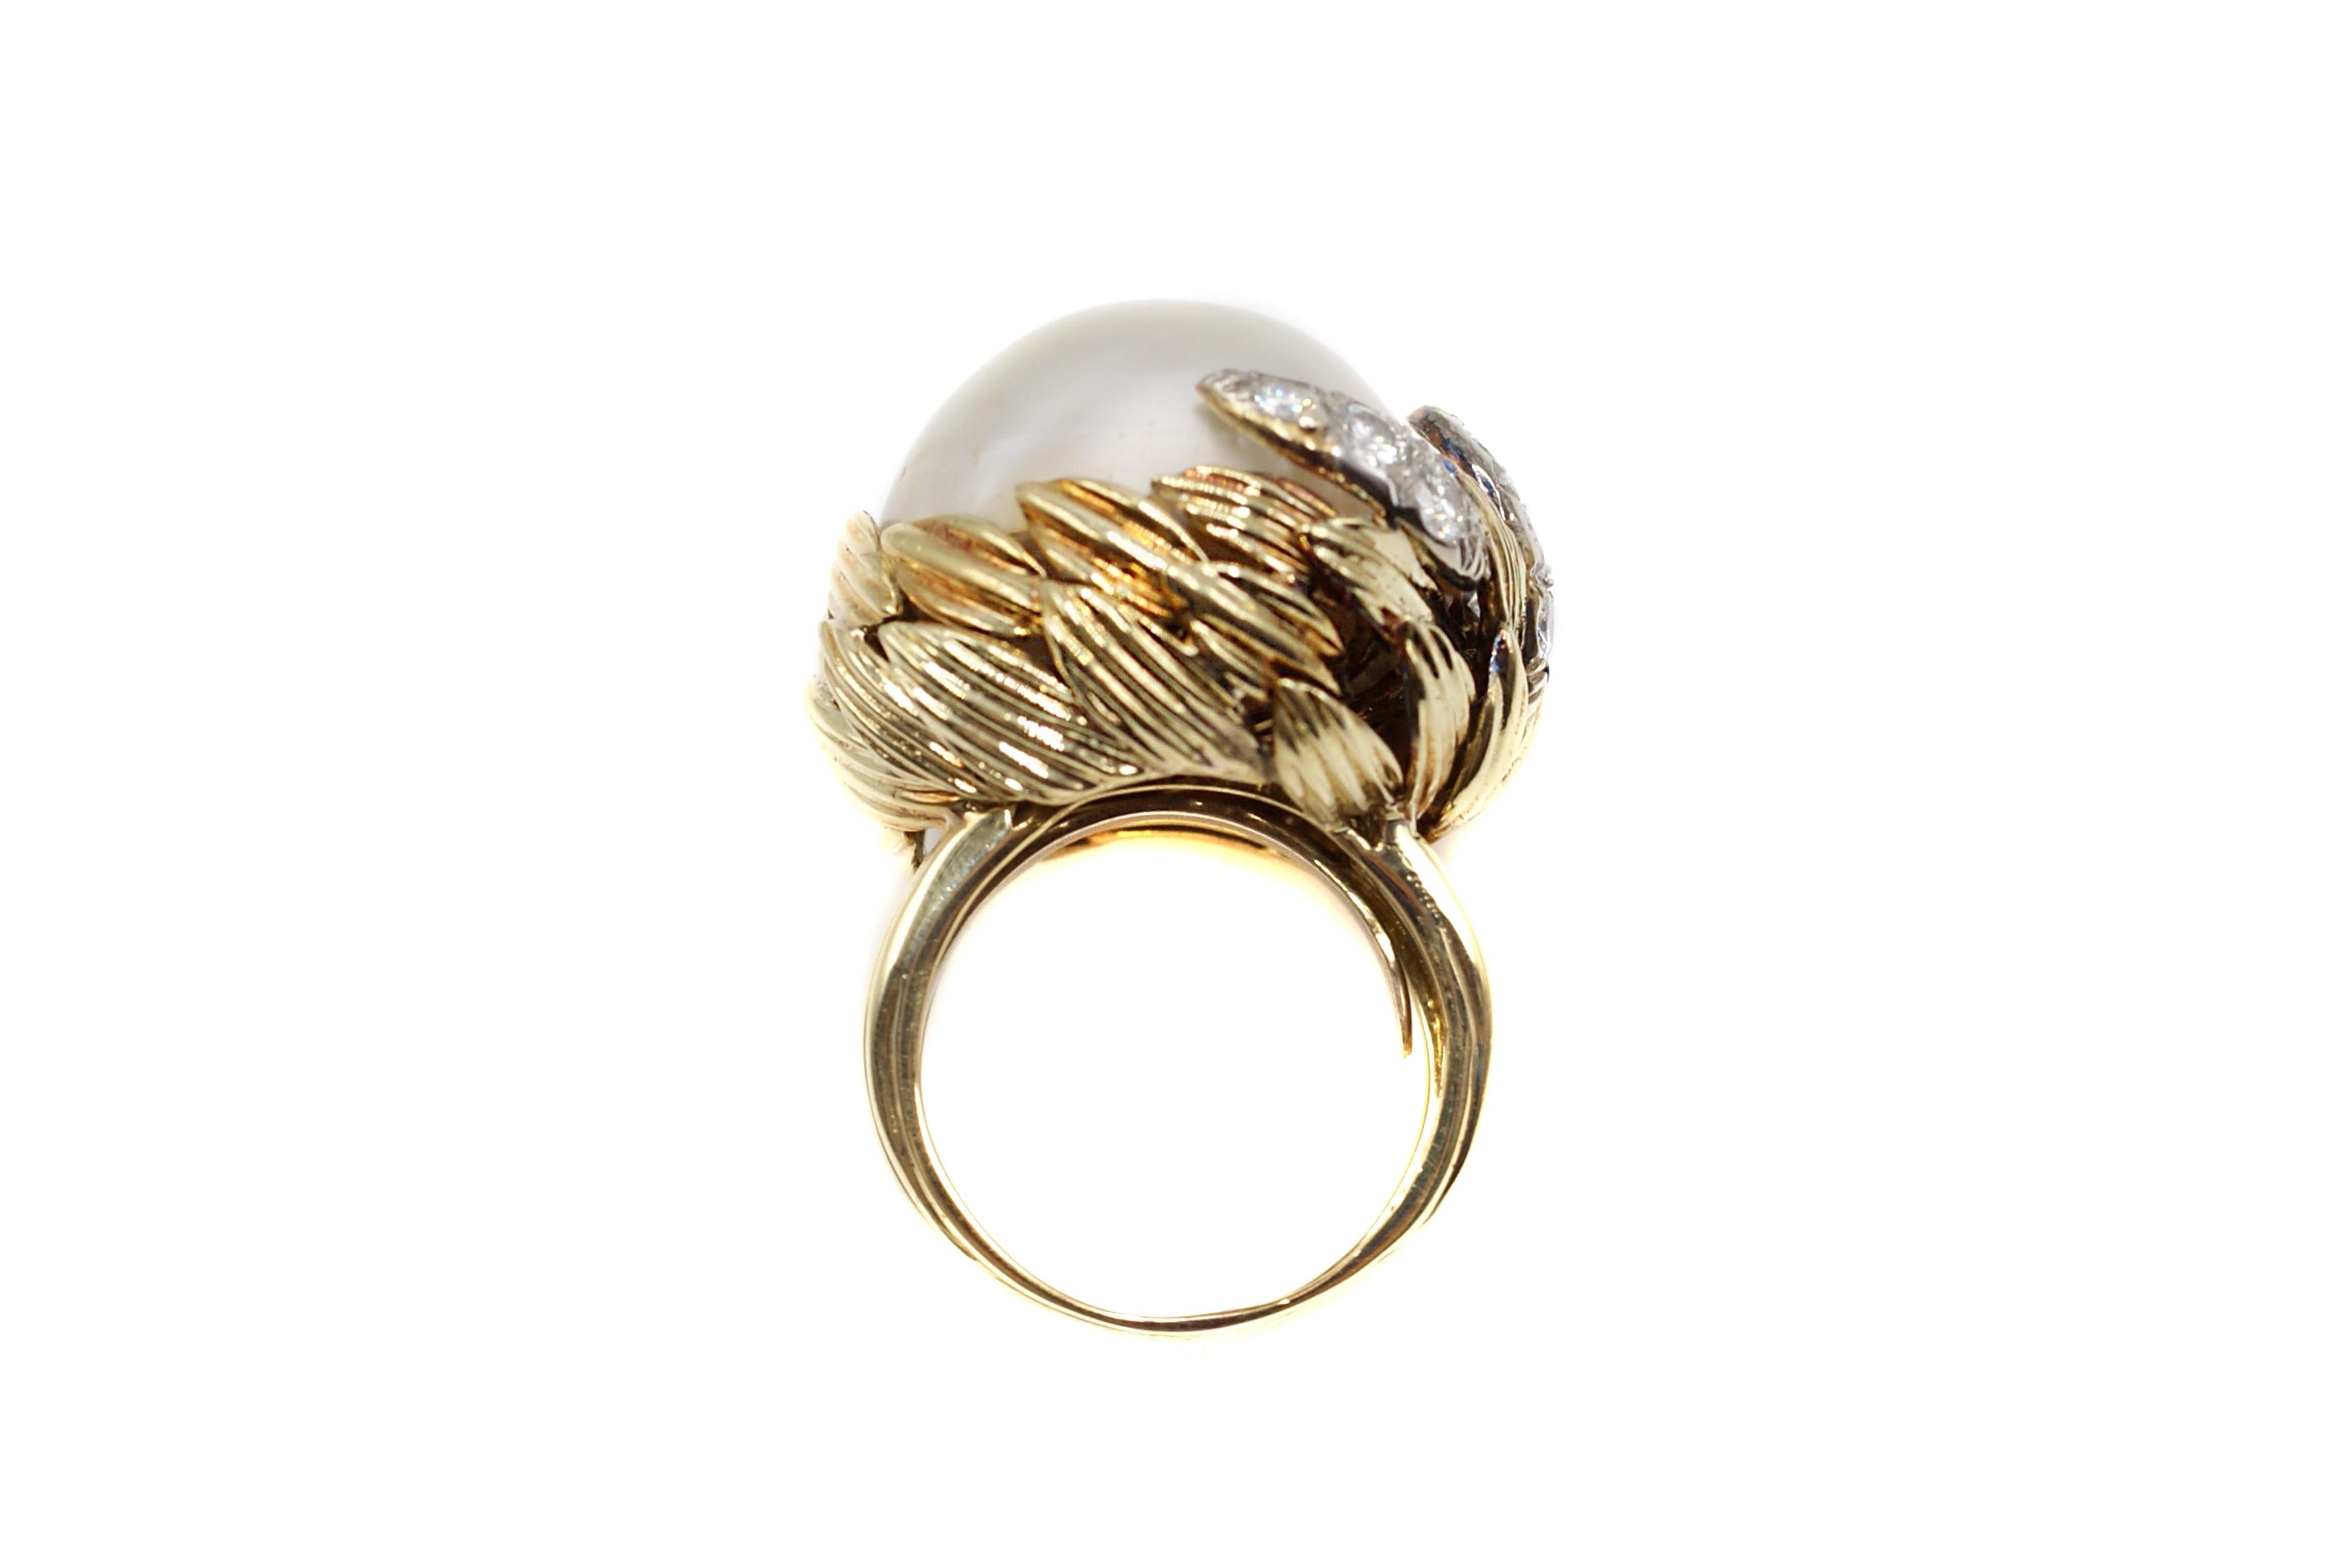 This bold 60s ring features an impressive Mabe Pearl with over 23 millimeters in diameter. The beautifully hand-crafted 18 karat yellow gold mounting has a double row of finely textured leaves surrounding and holding the pearl with 3 of the petals